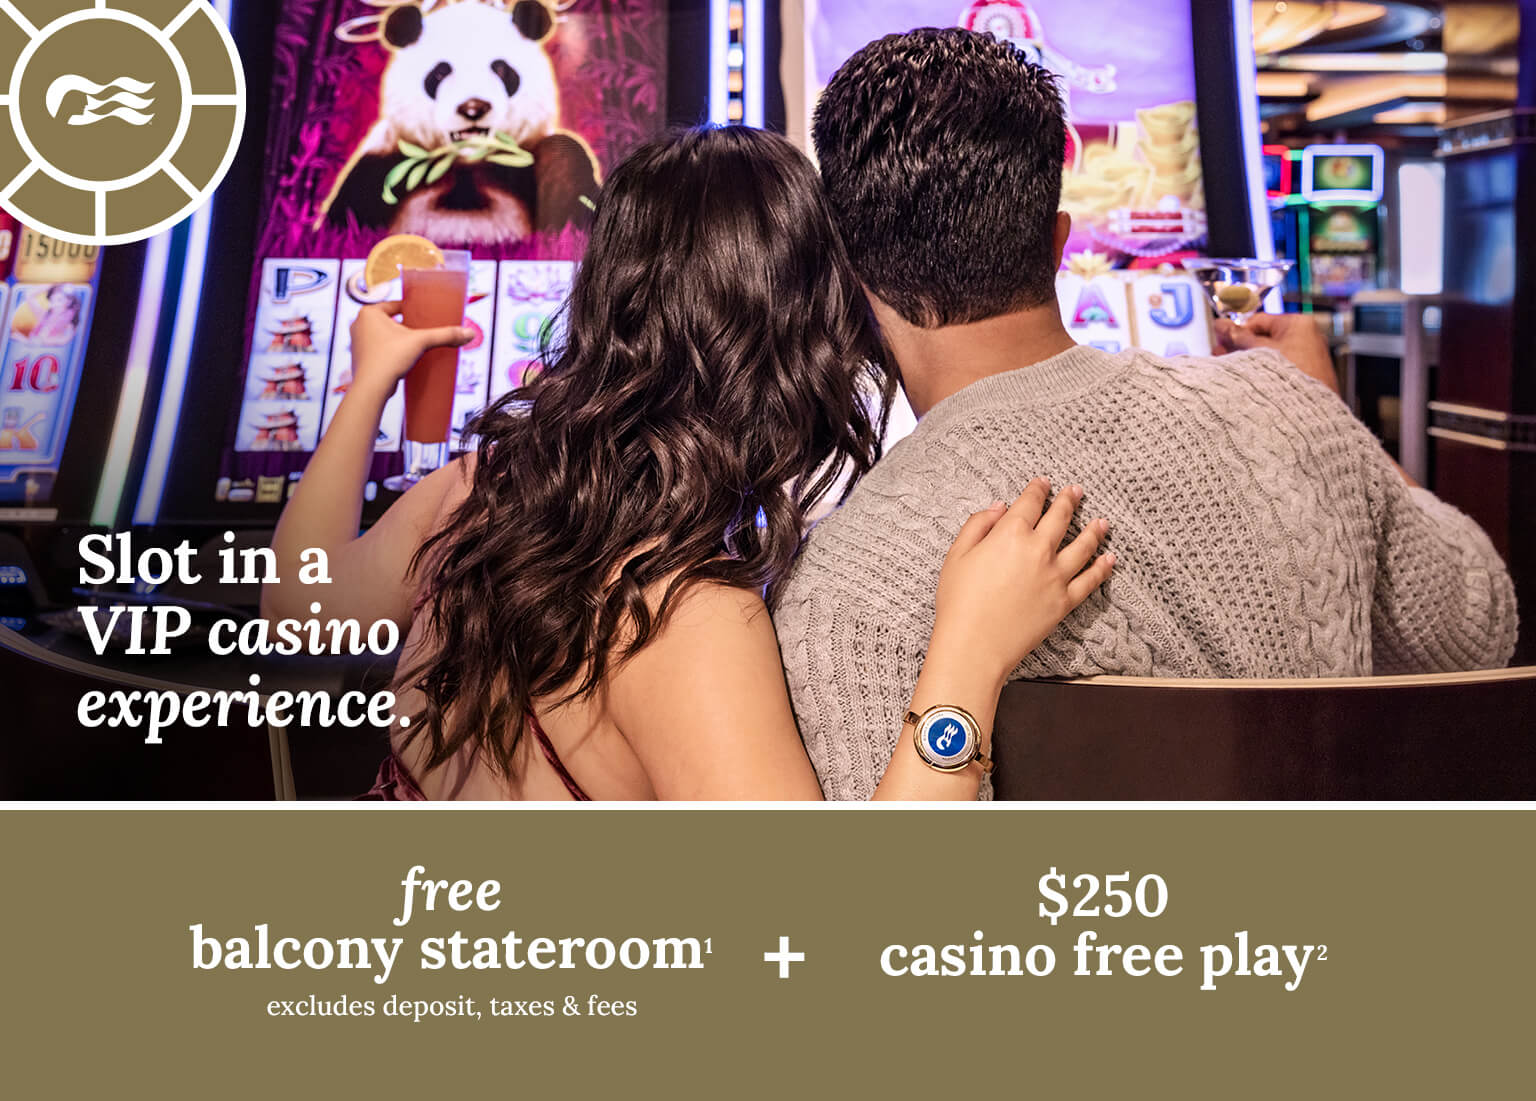 Slot in a VIP casino experience. Free balcony stateroom + $250 casino free play + princess plus with drinks, Wi-Fi, and crew appreciation included